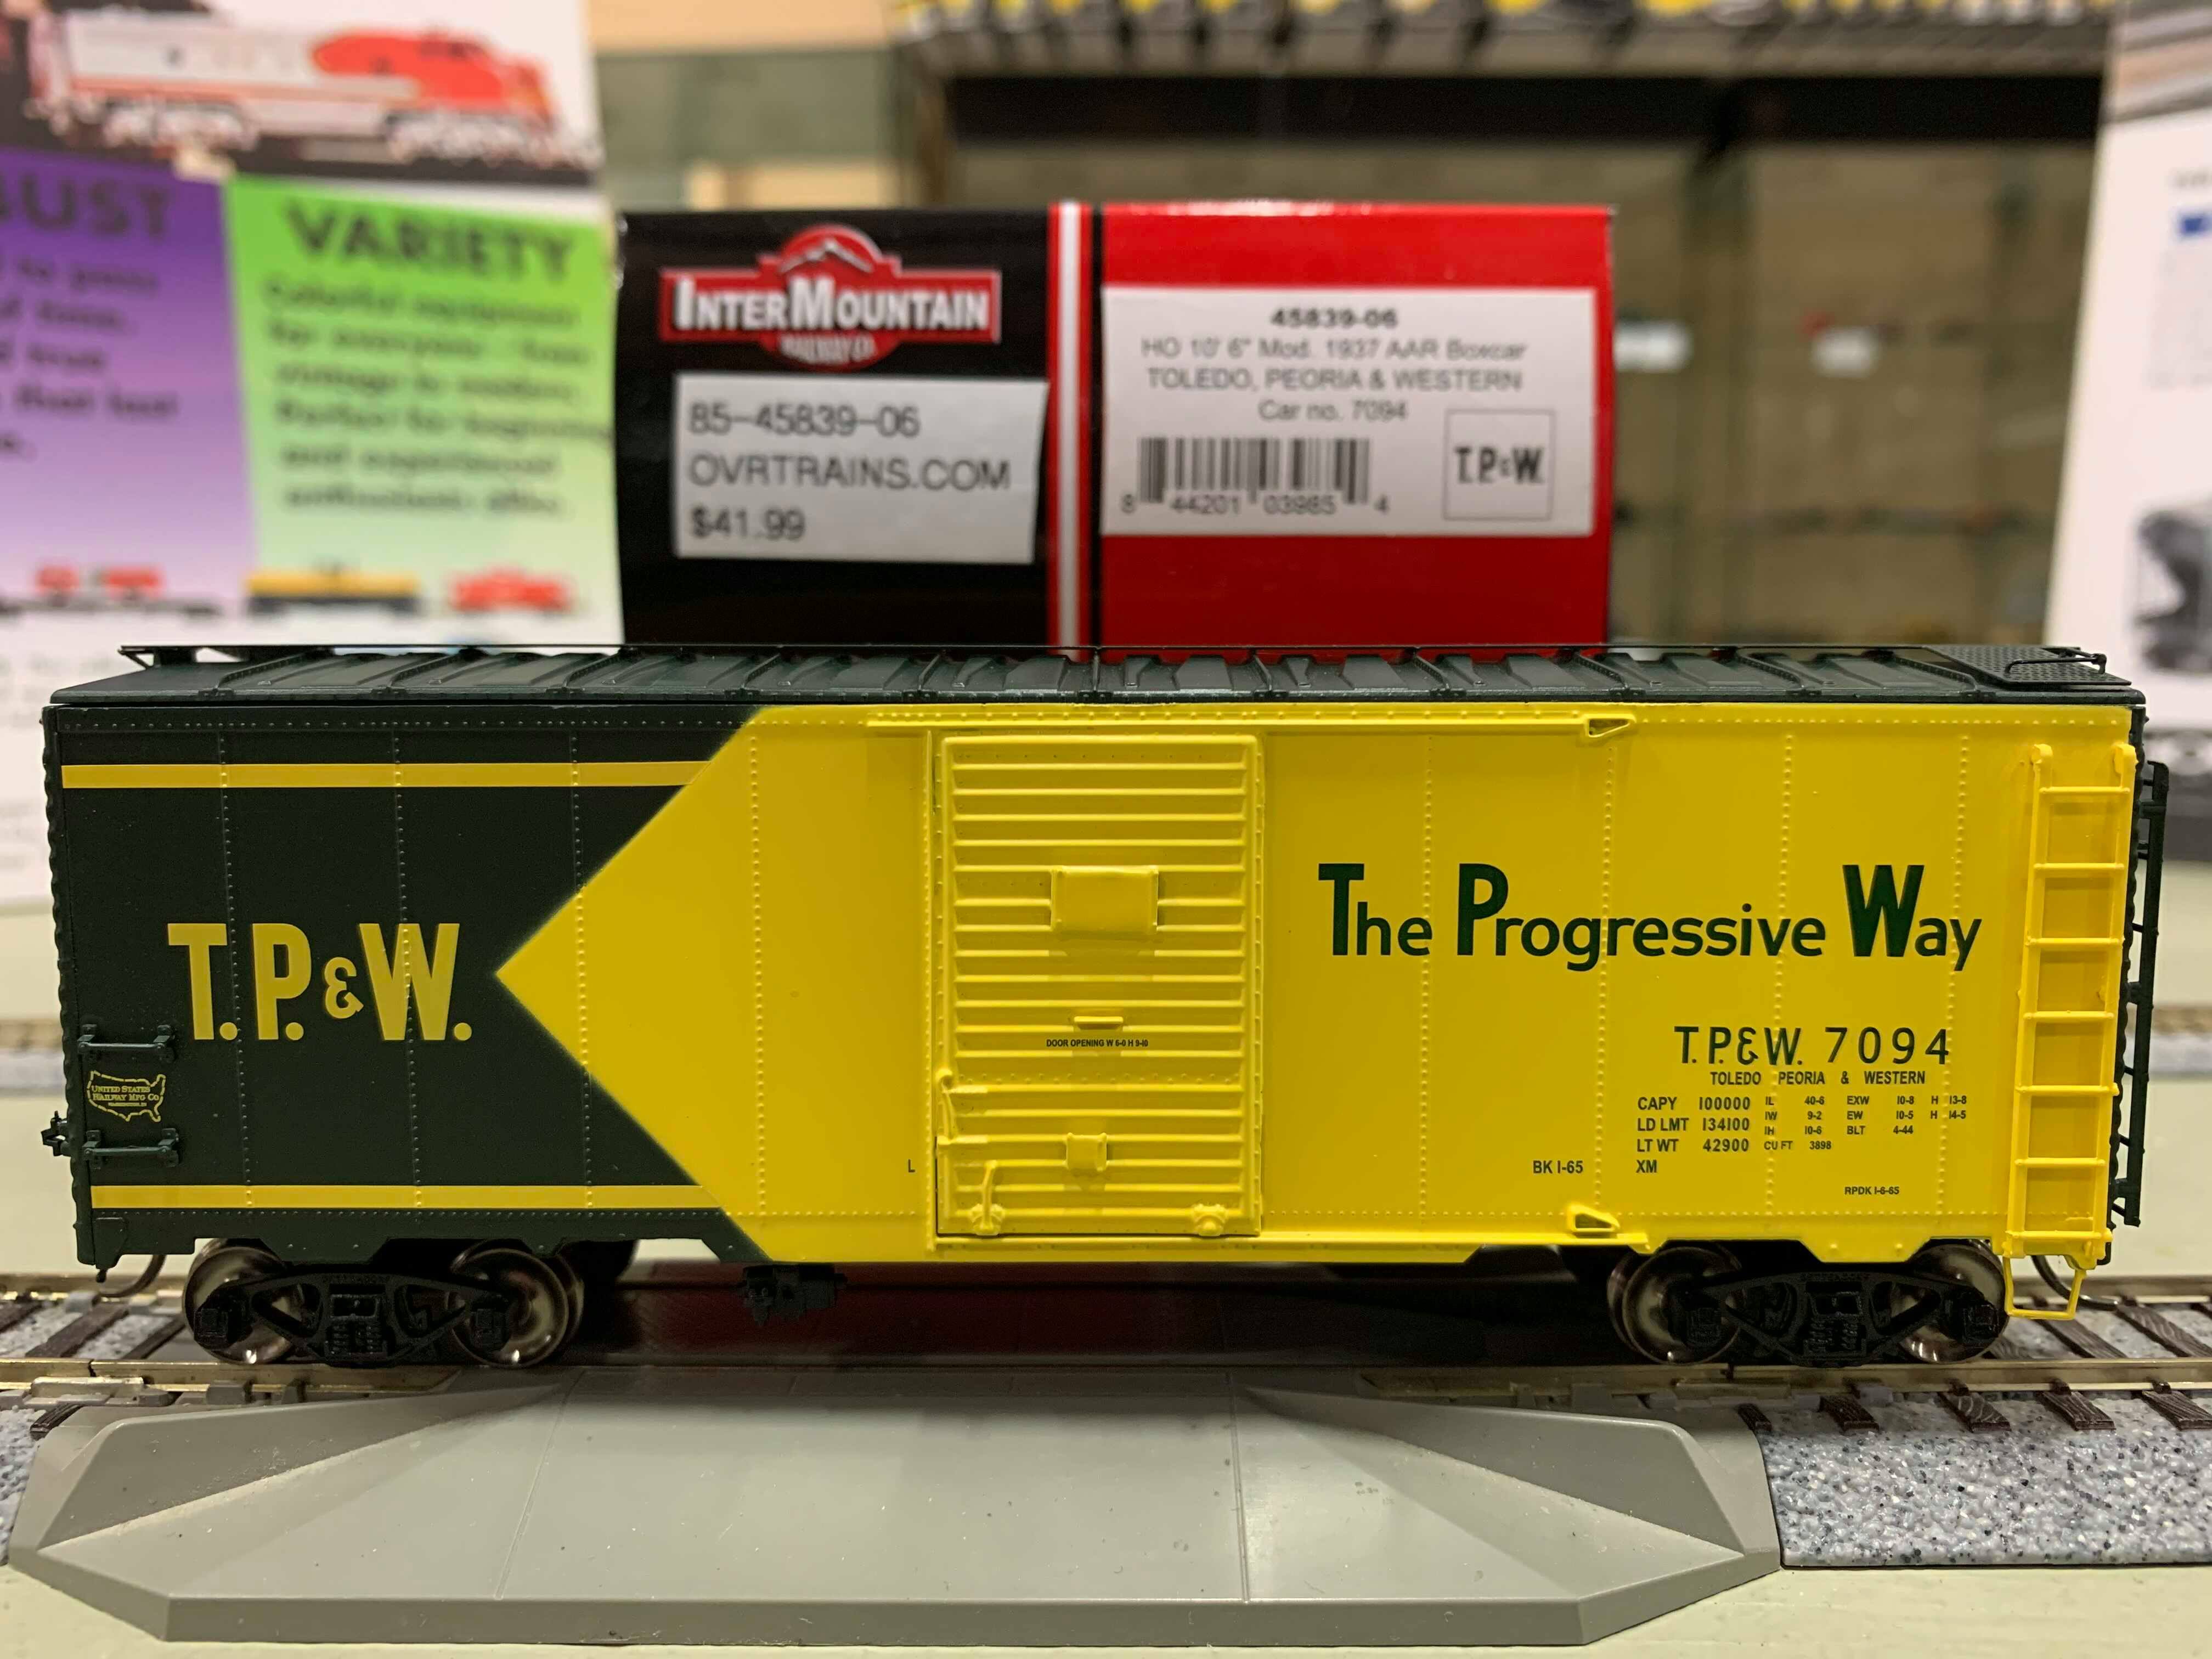 Intermountain 45839-03 HO Scale - 10Ft 6In Modified 1937 AAR Boxcar - Toledo, Peoria & Western #7045